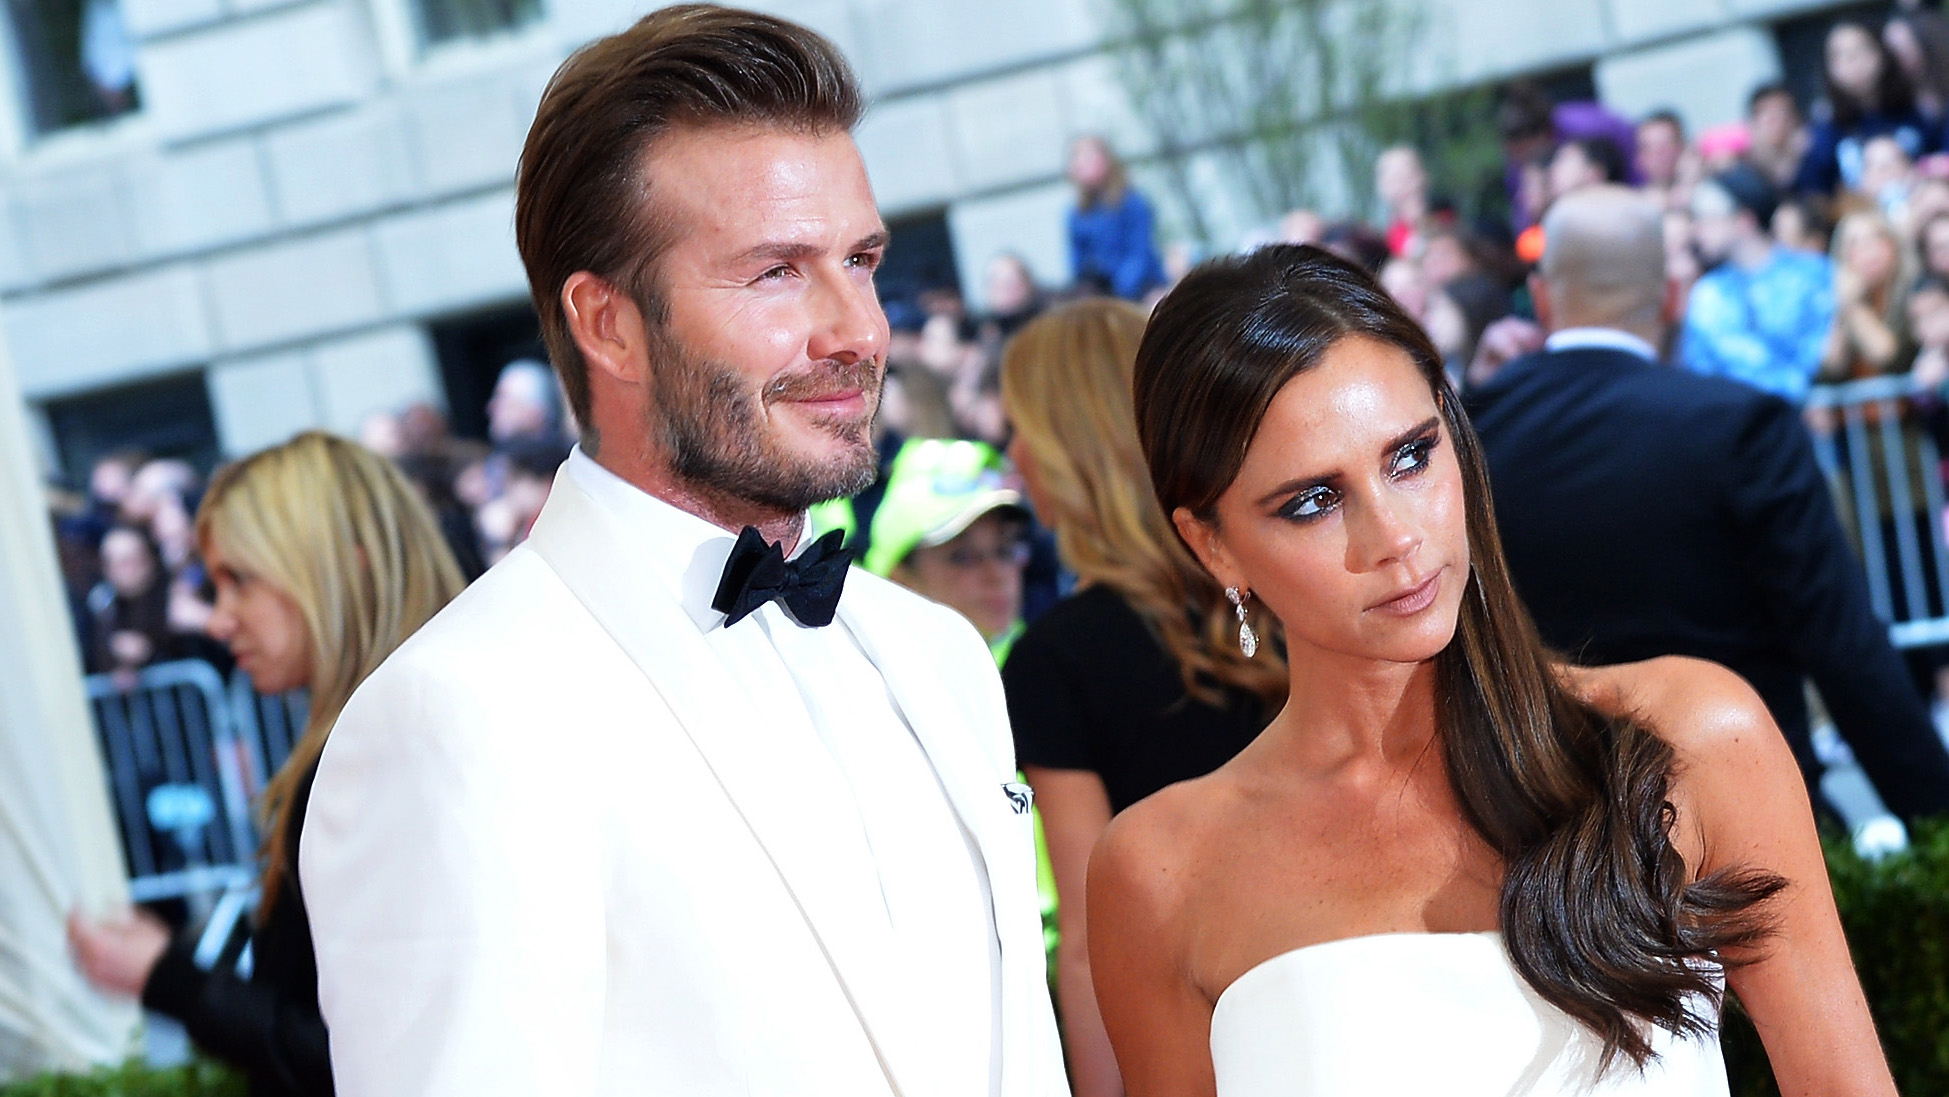 Victoria Beckham Was Told Her Marriage to David Beckham 'Wouldn't Last